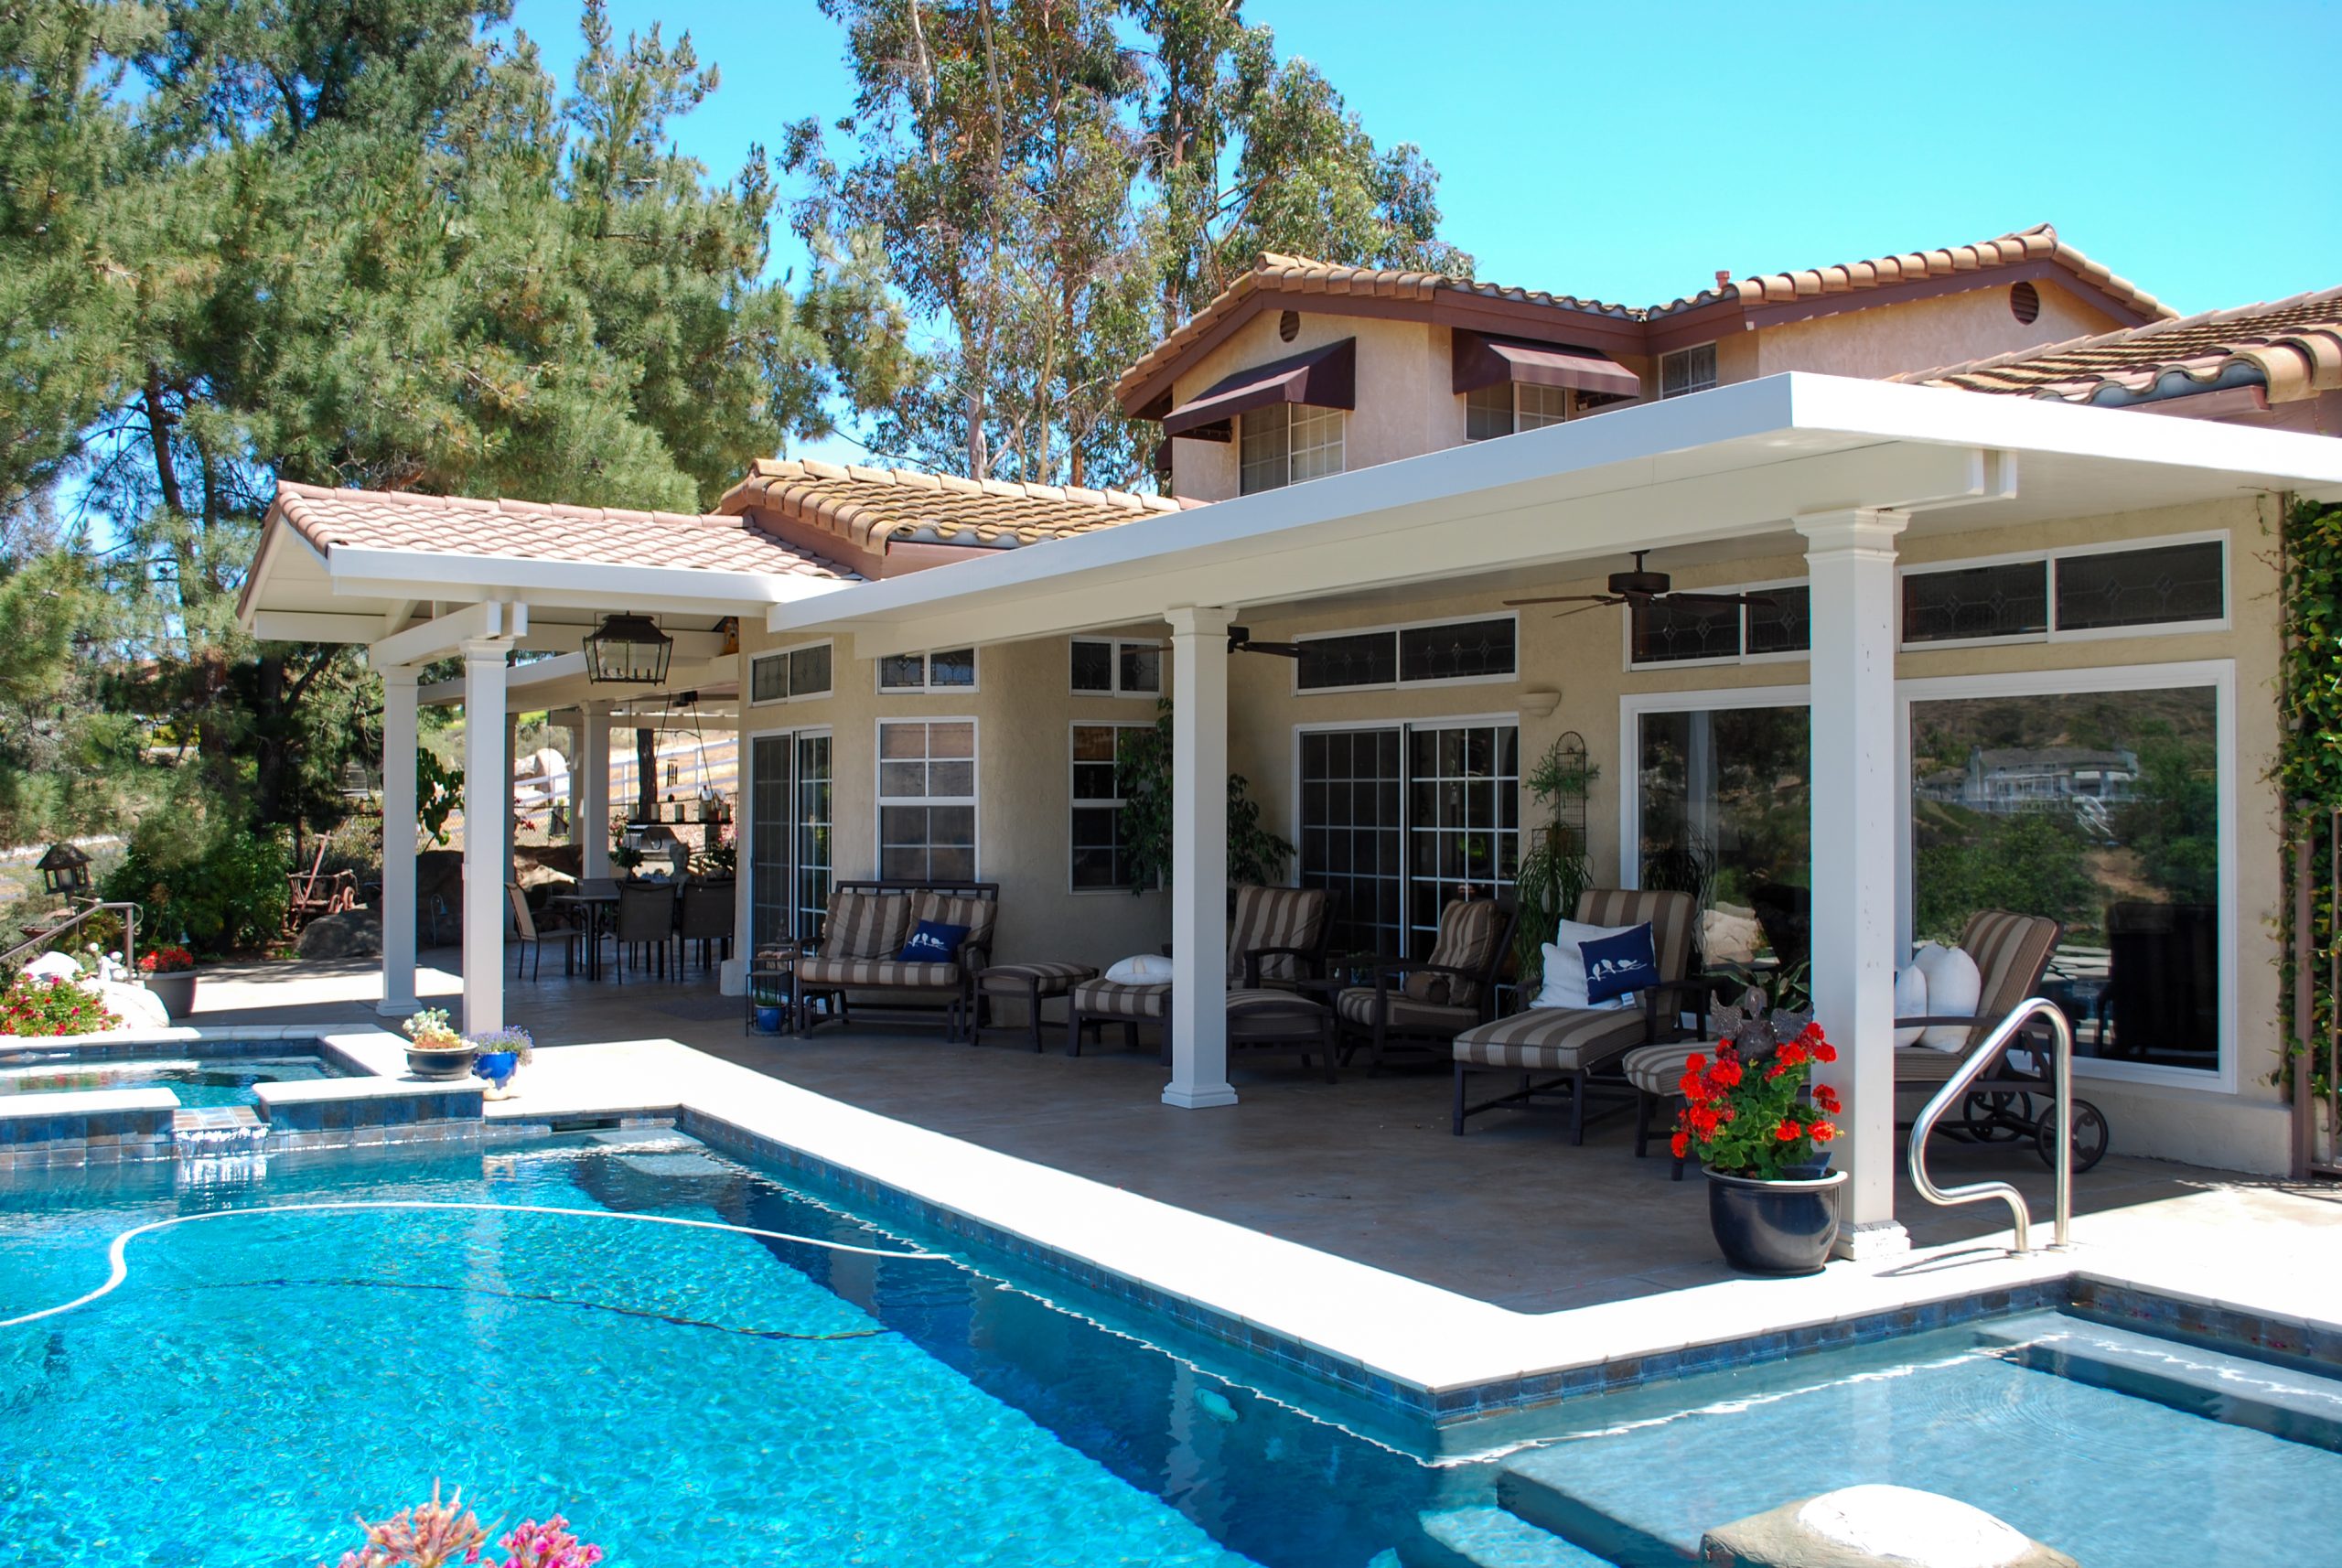 Traditional style solid patio cover over an outdoor seating area next to a pool at a home in San Diego California